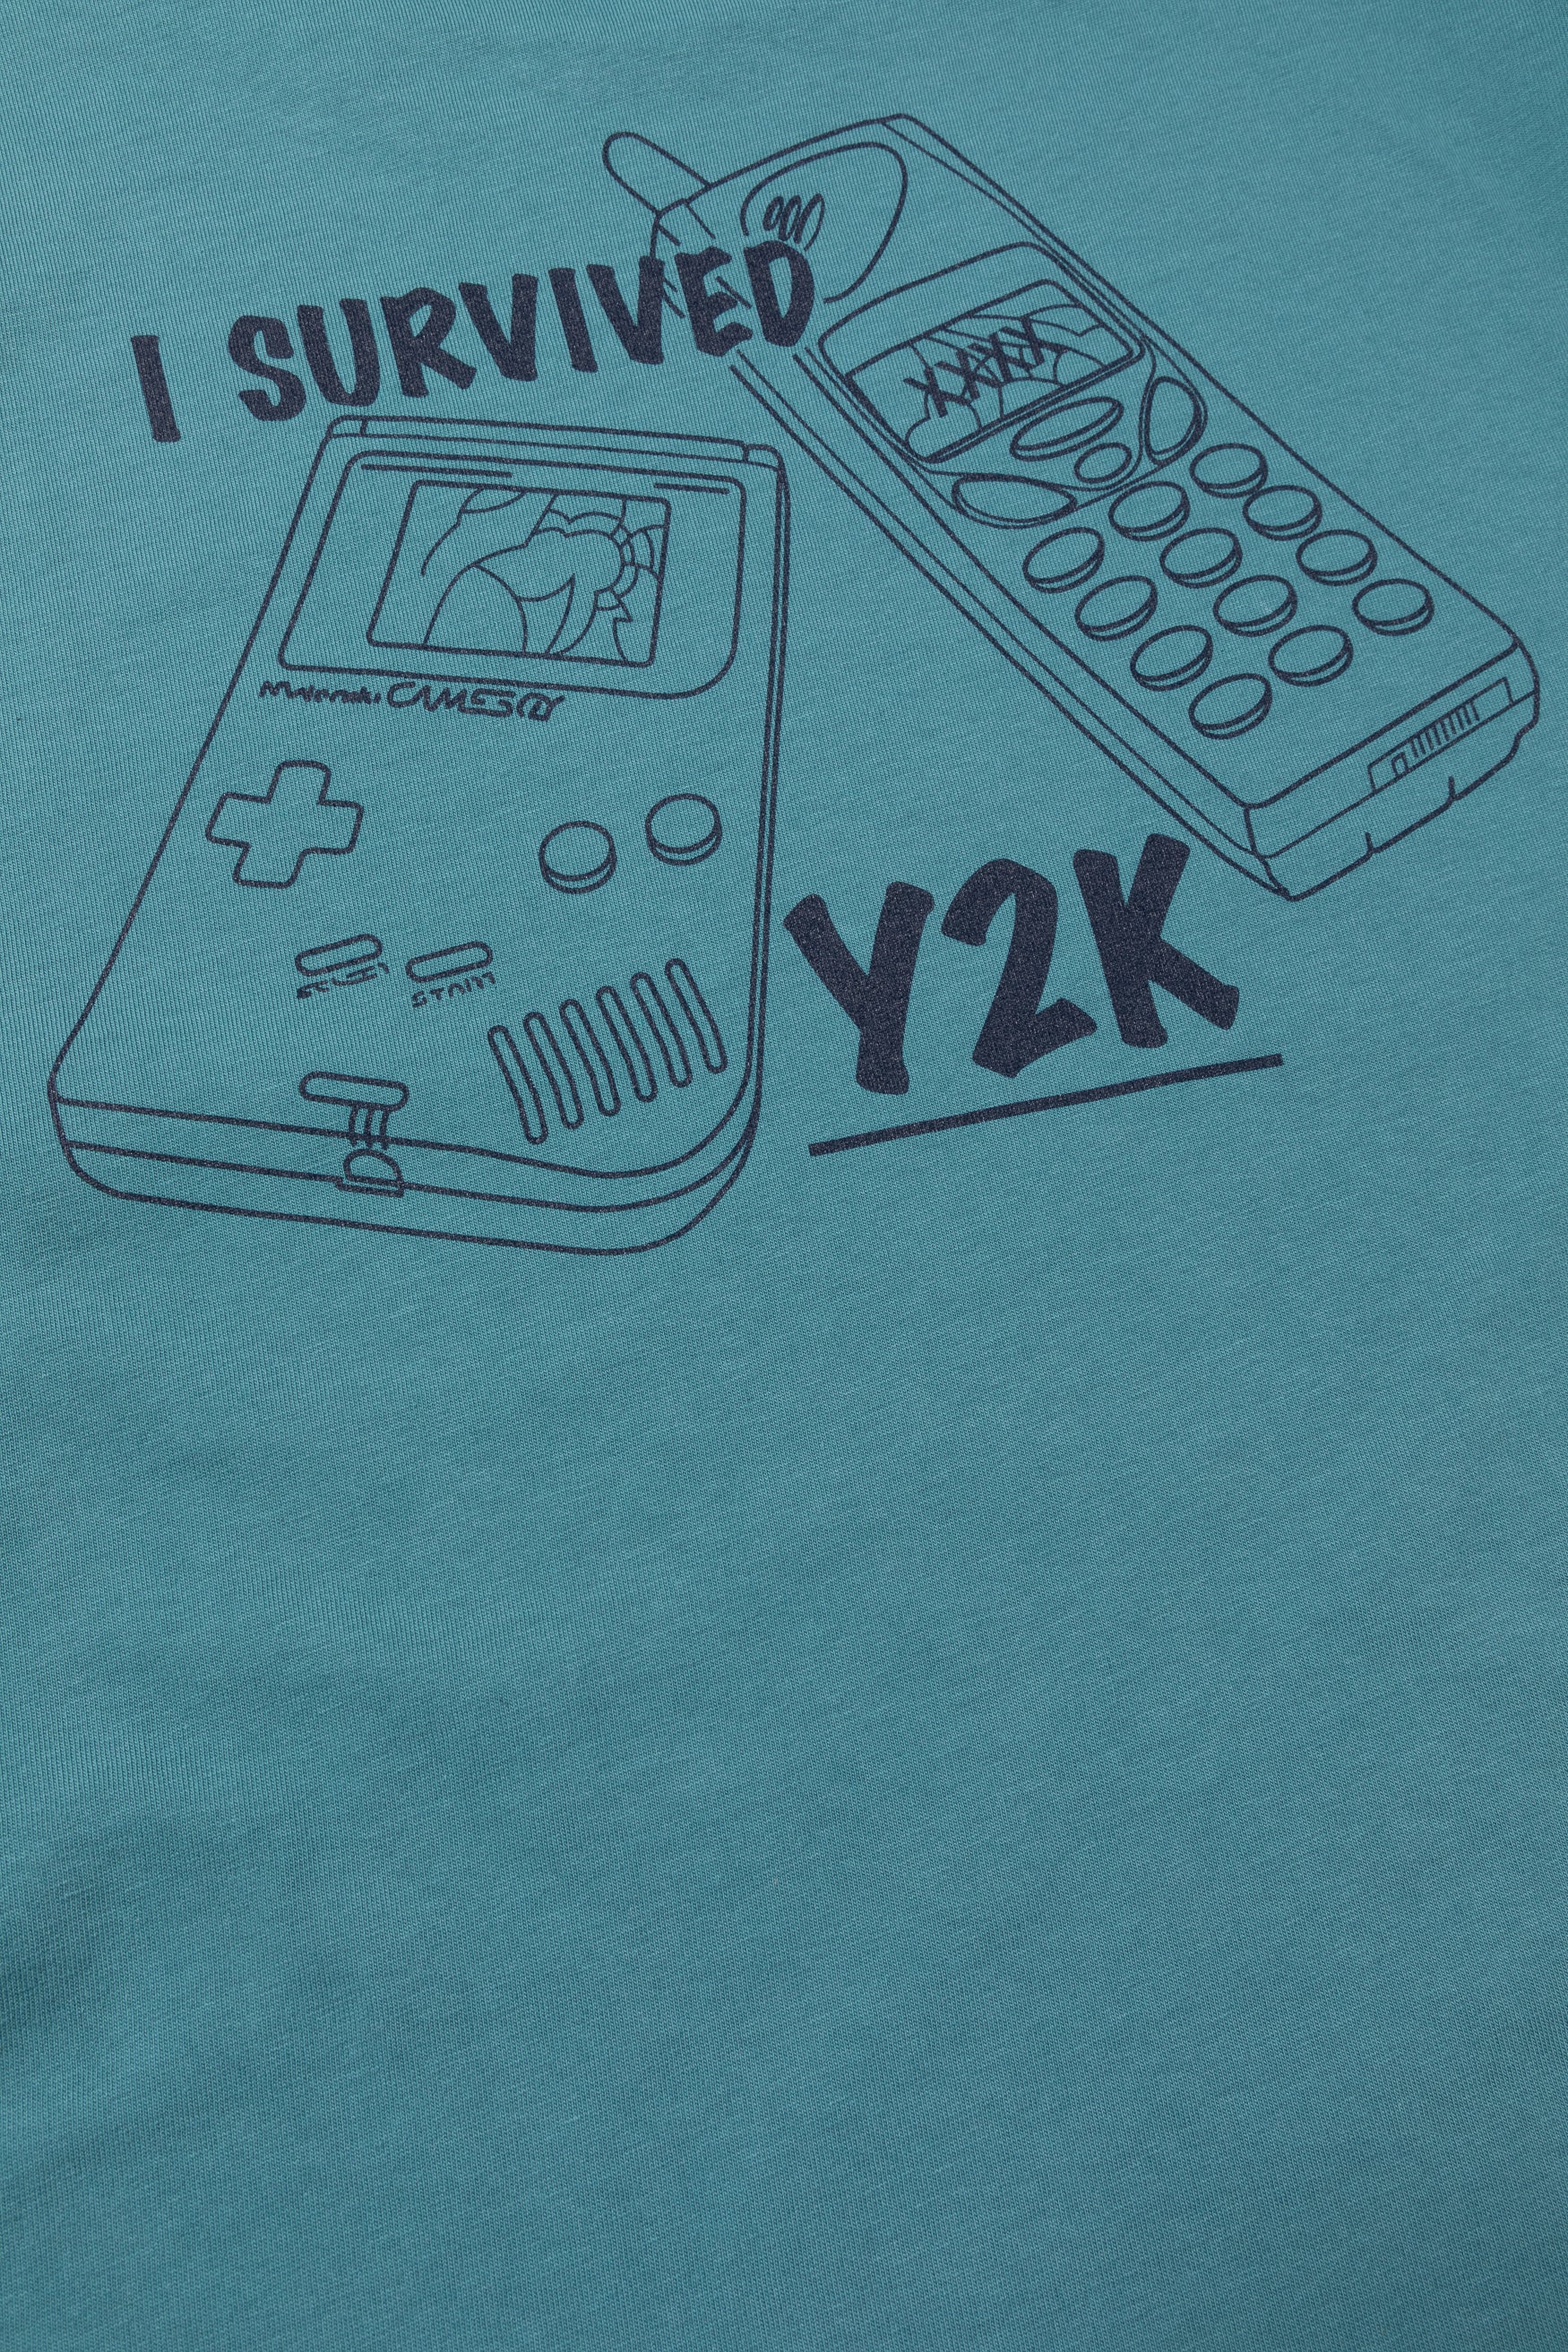 Load image into Gallery viewer, Y2K LS Tee